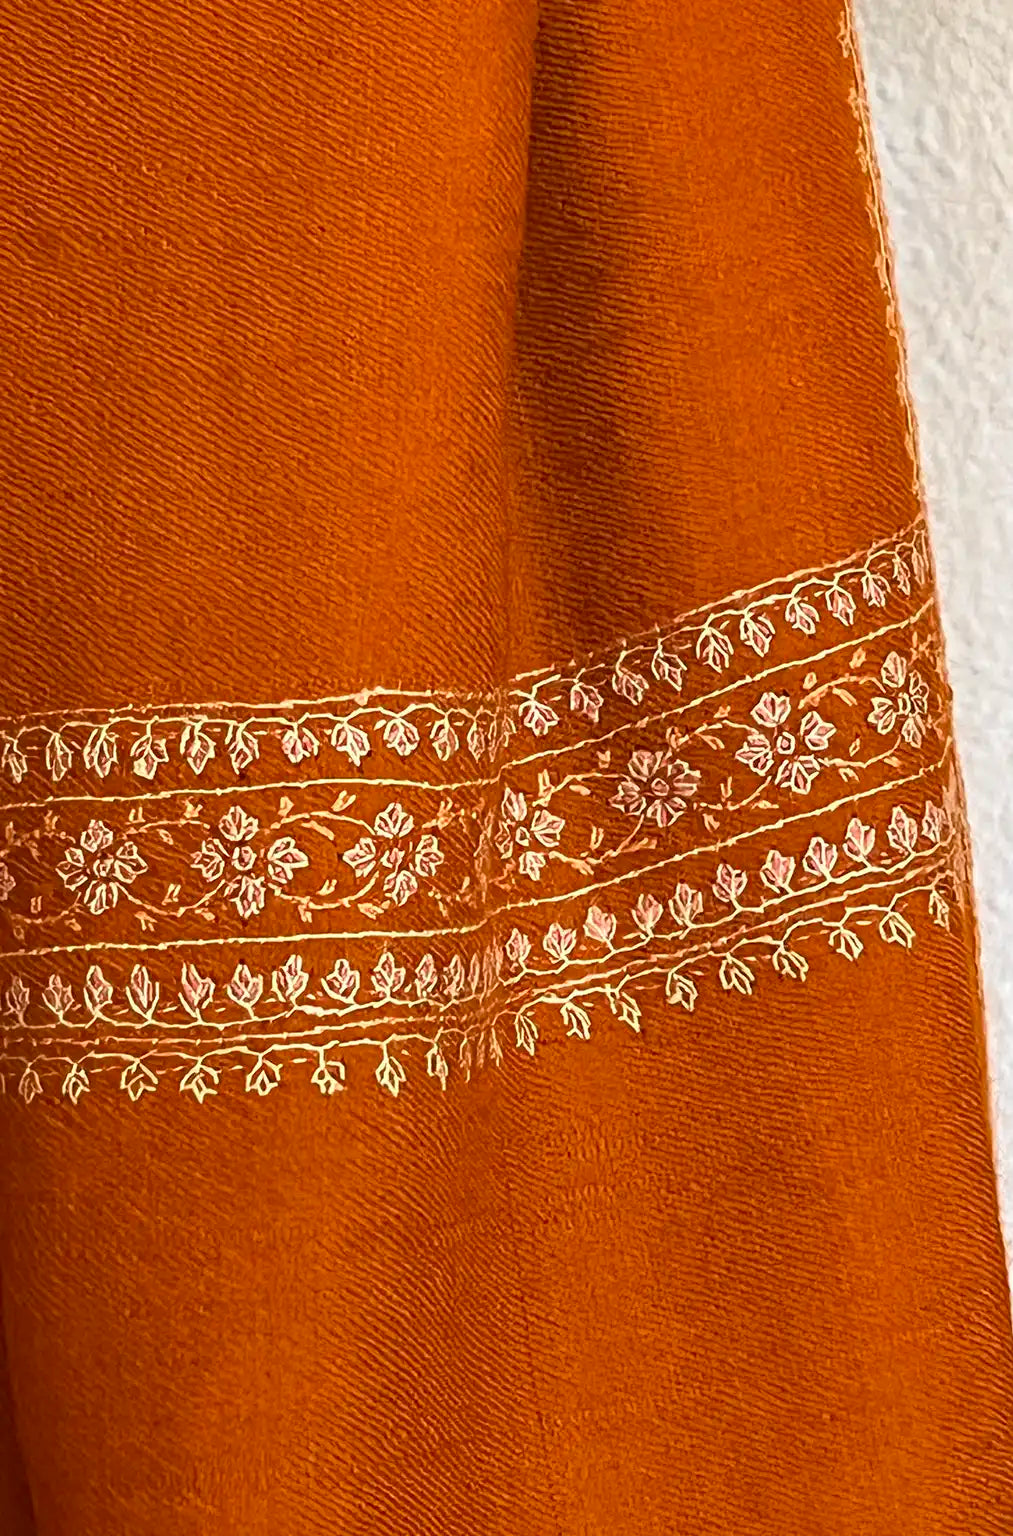 Pashmina stole in burnt orange with light border embroidery, 100% cashmere and handmade